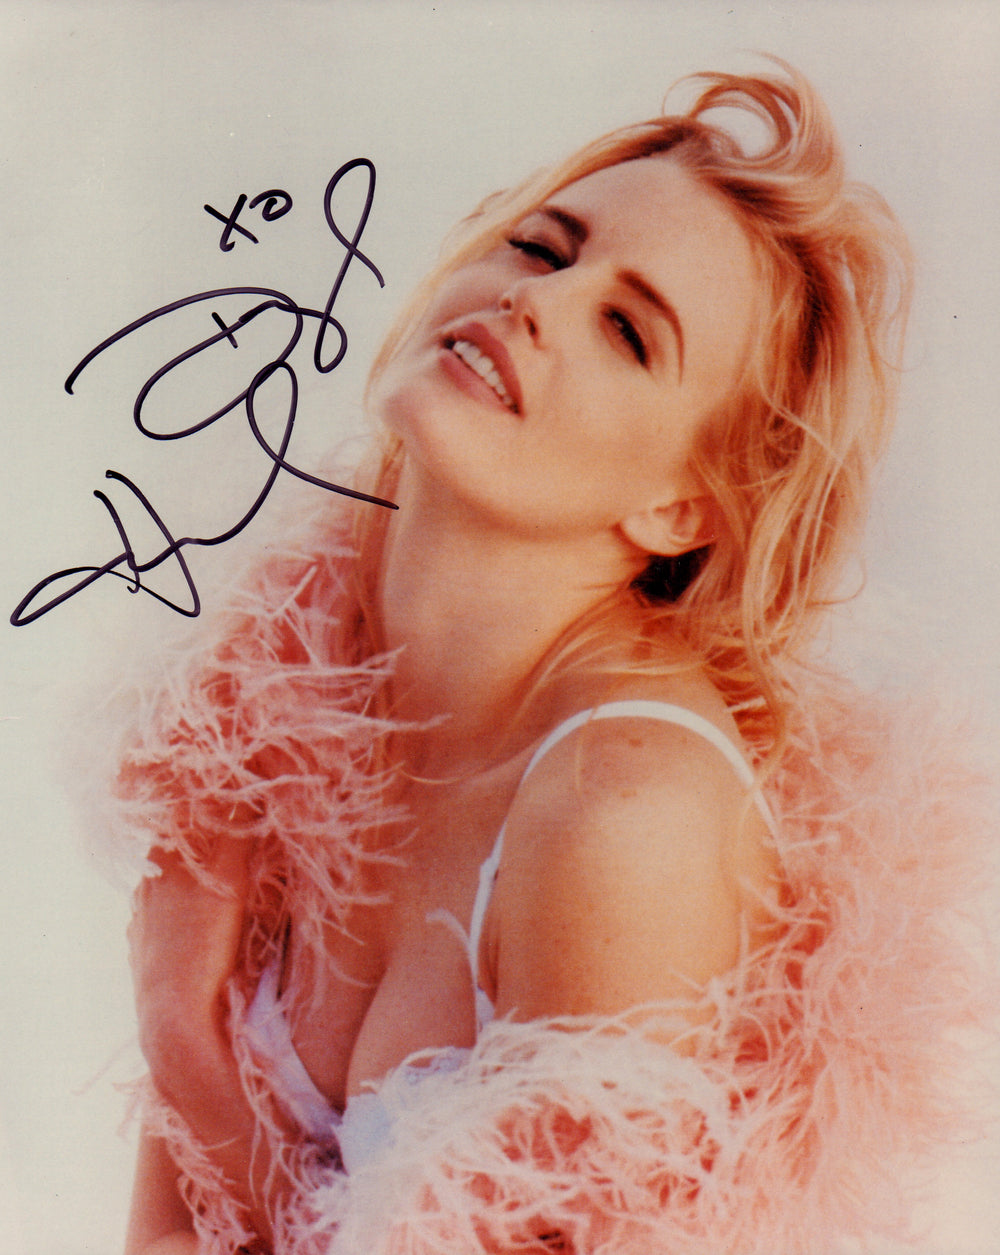 Daryl Hannah from Kill Bill and Blade Runner Sexy Signed 8x10 Photo